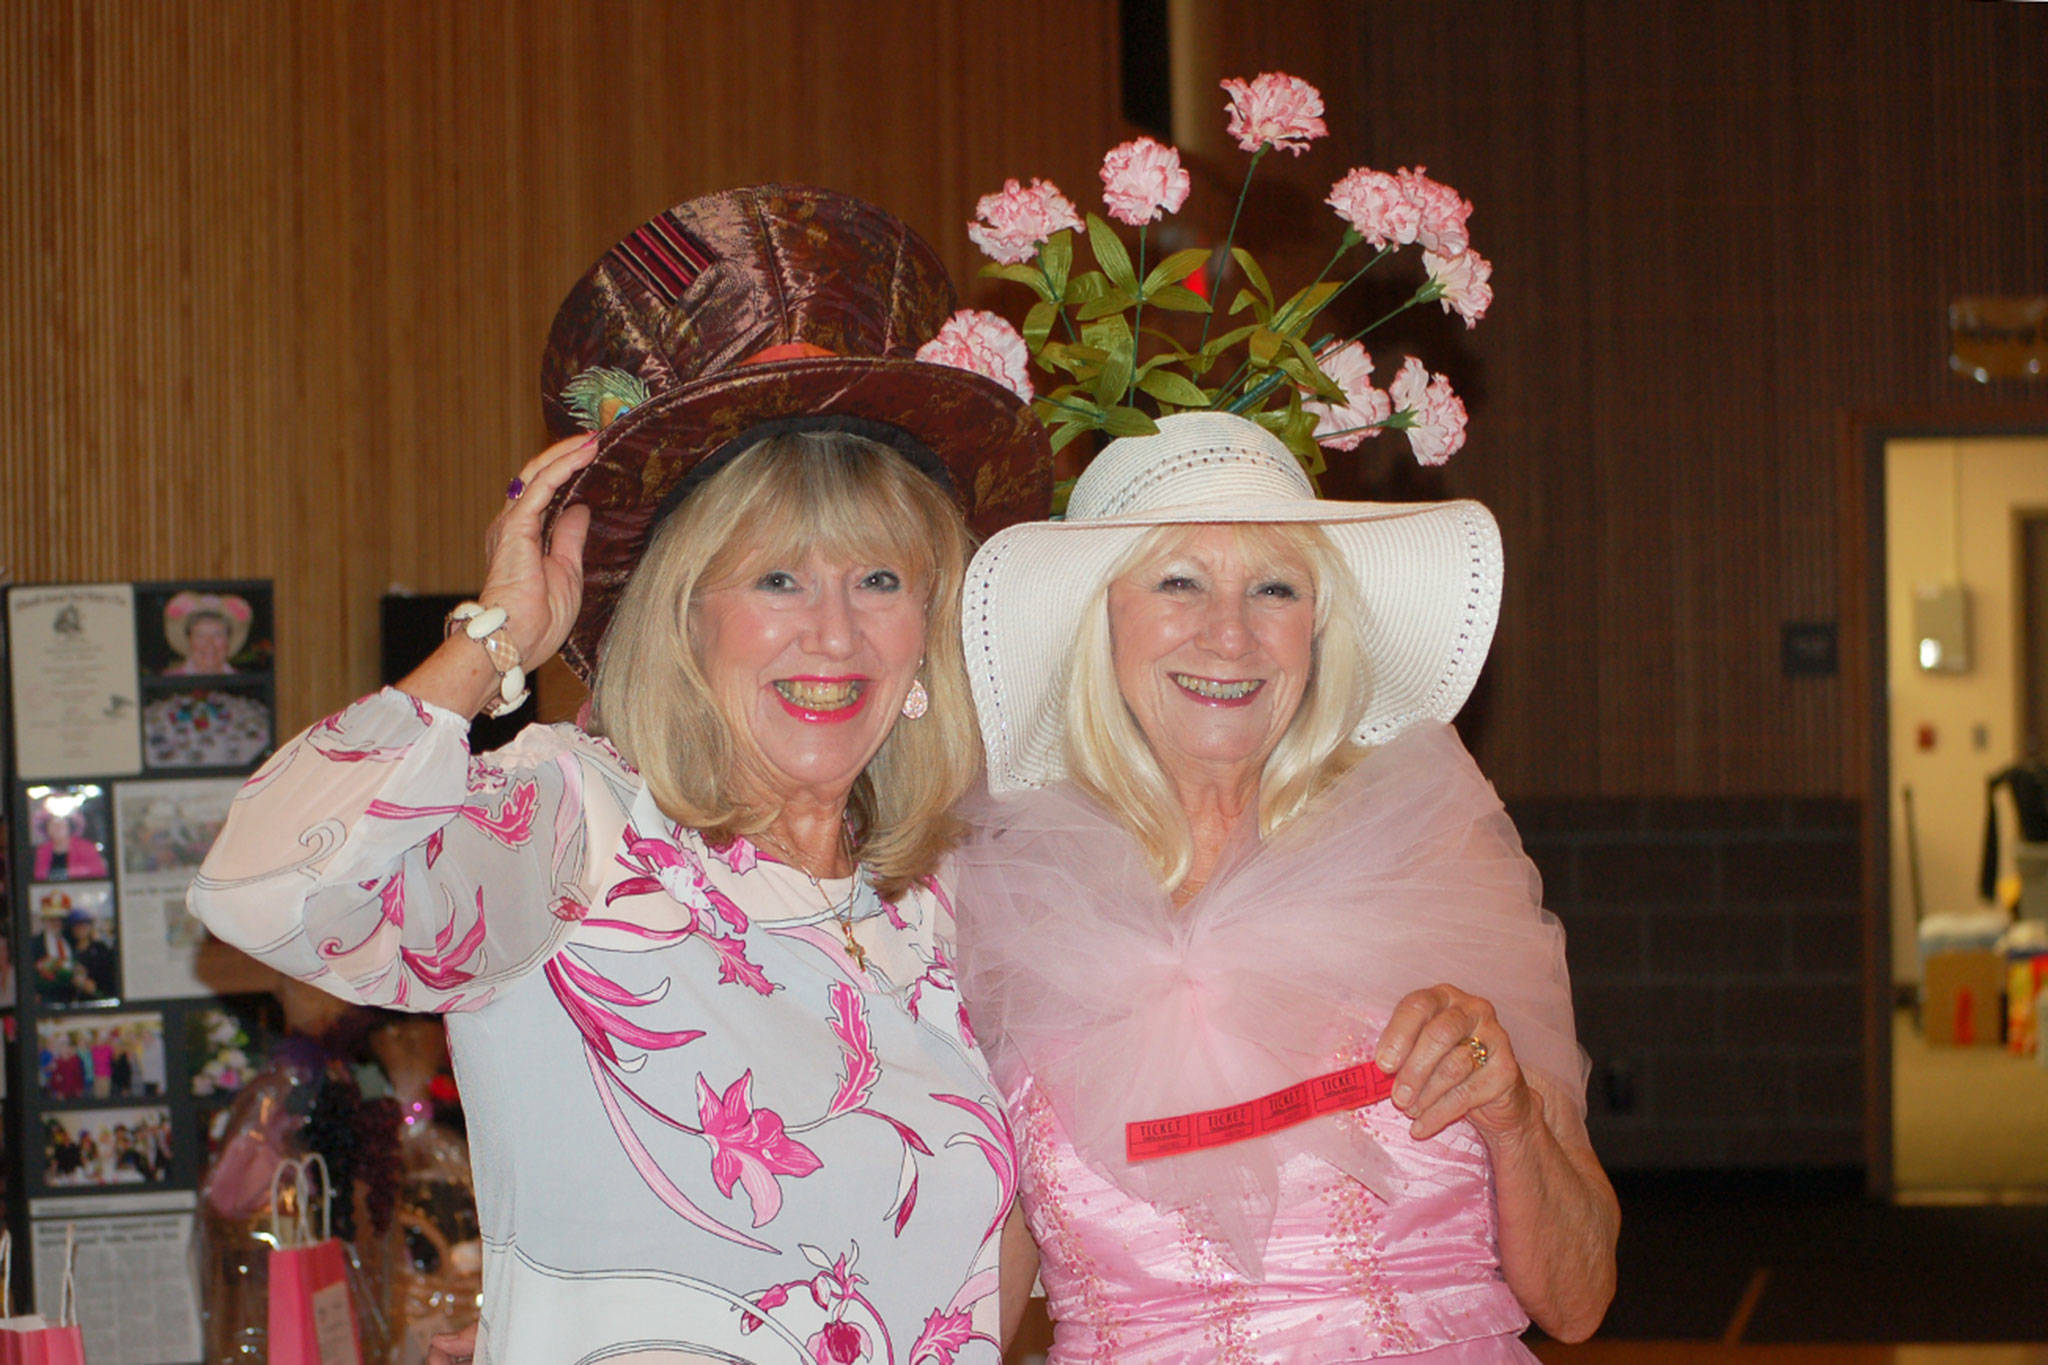 Locals Kathryn Haskell, left, and her friend Marian Fine, sport their “pretty in pink” attire and creative hats at the 21st annual Mad Hatters Tea party and luncheon on Oct. 5. The event raises awareness for breast cancer and funds to support breast cancer organizations. Sequim Gazette photo by Erin Hawkins